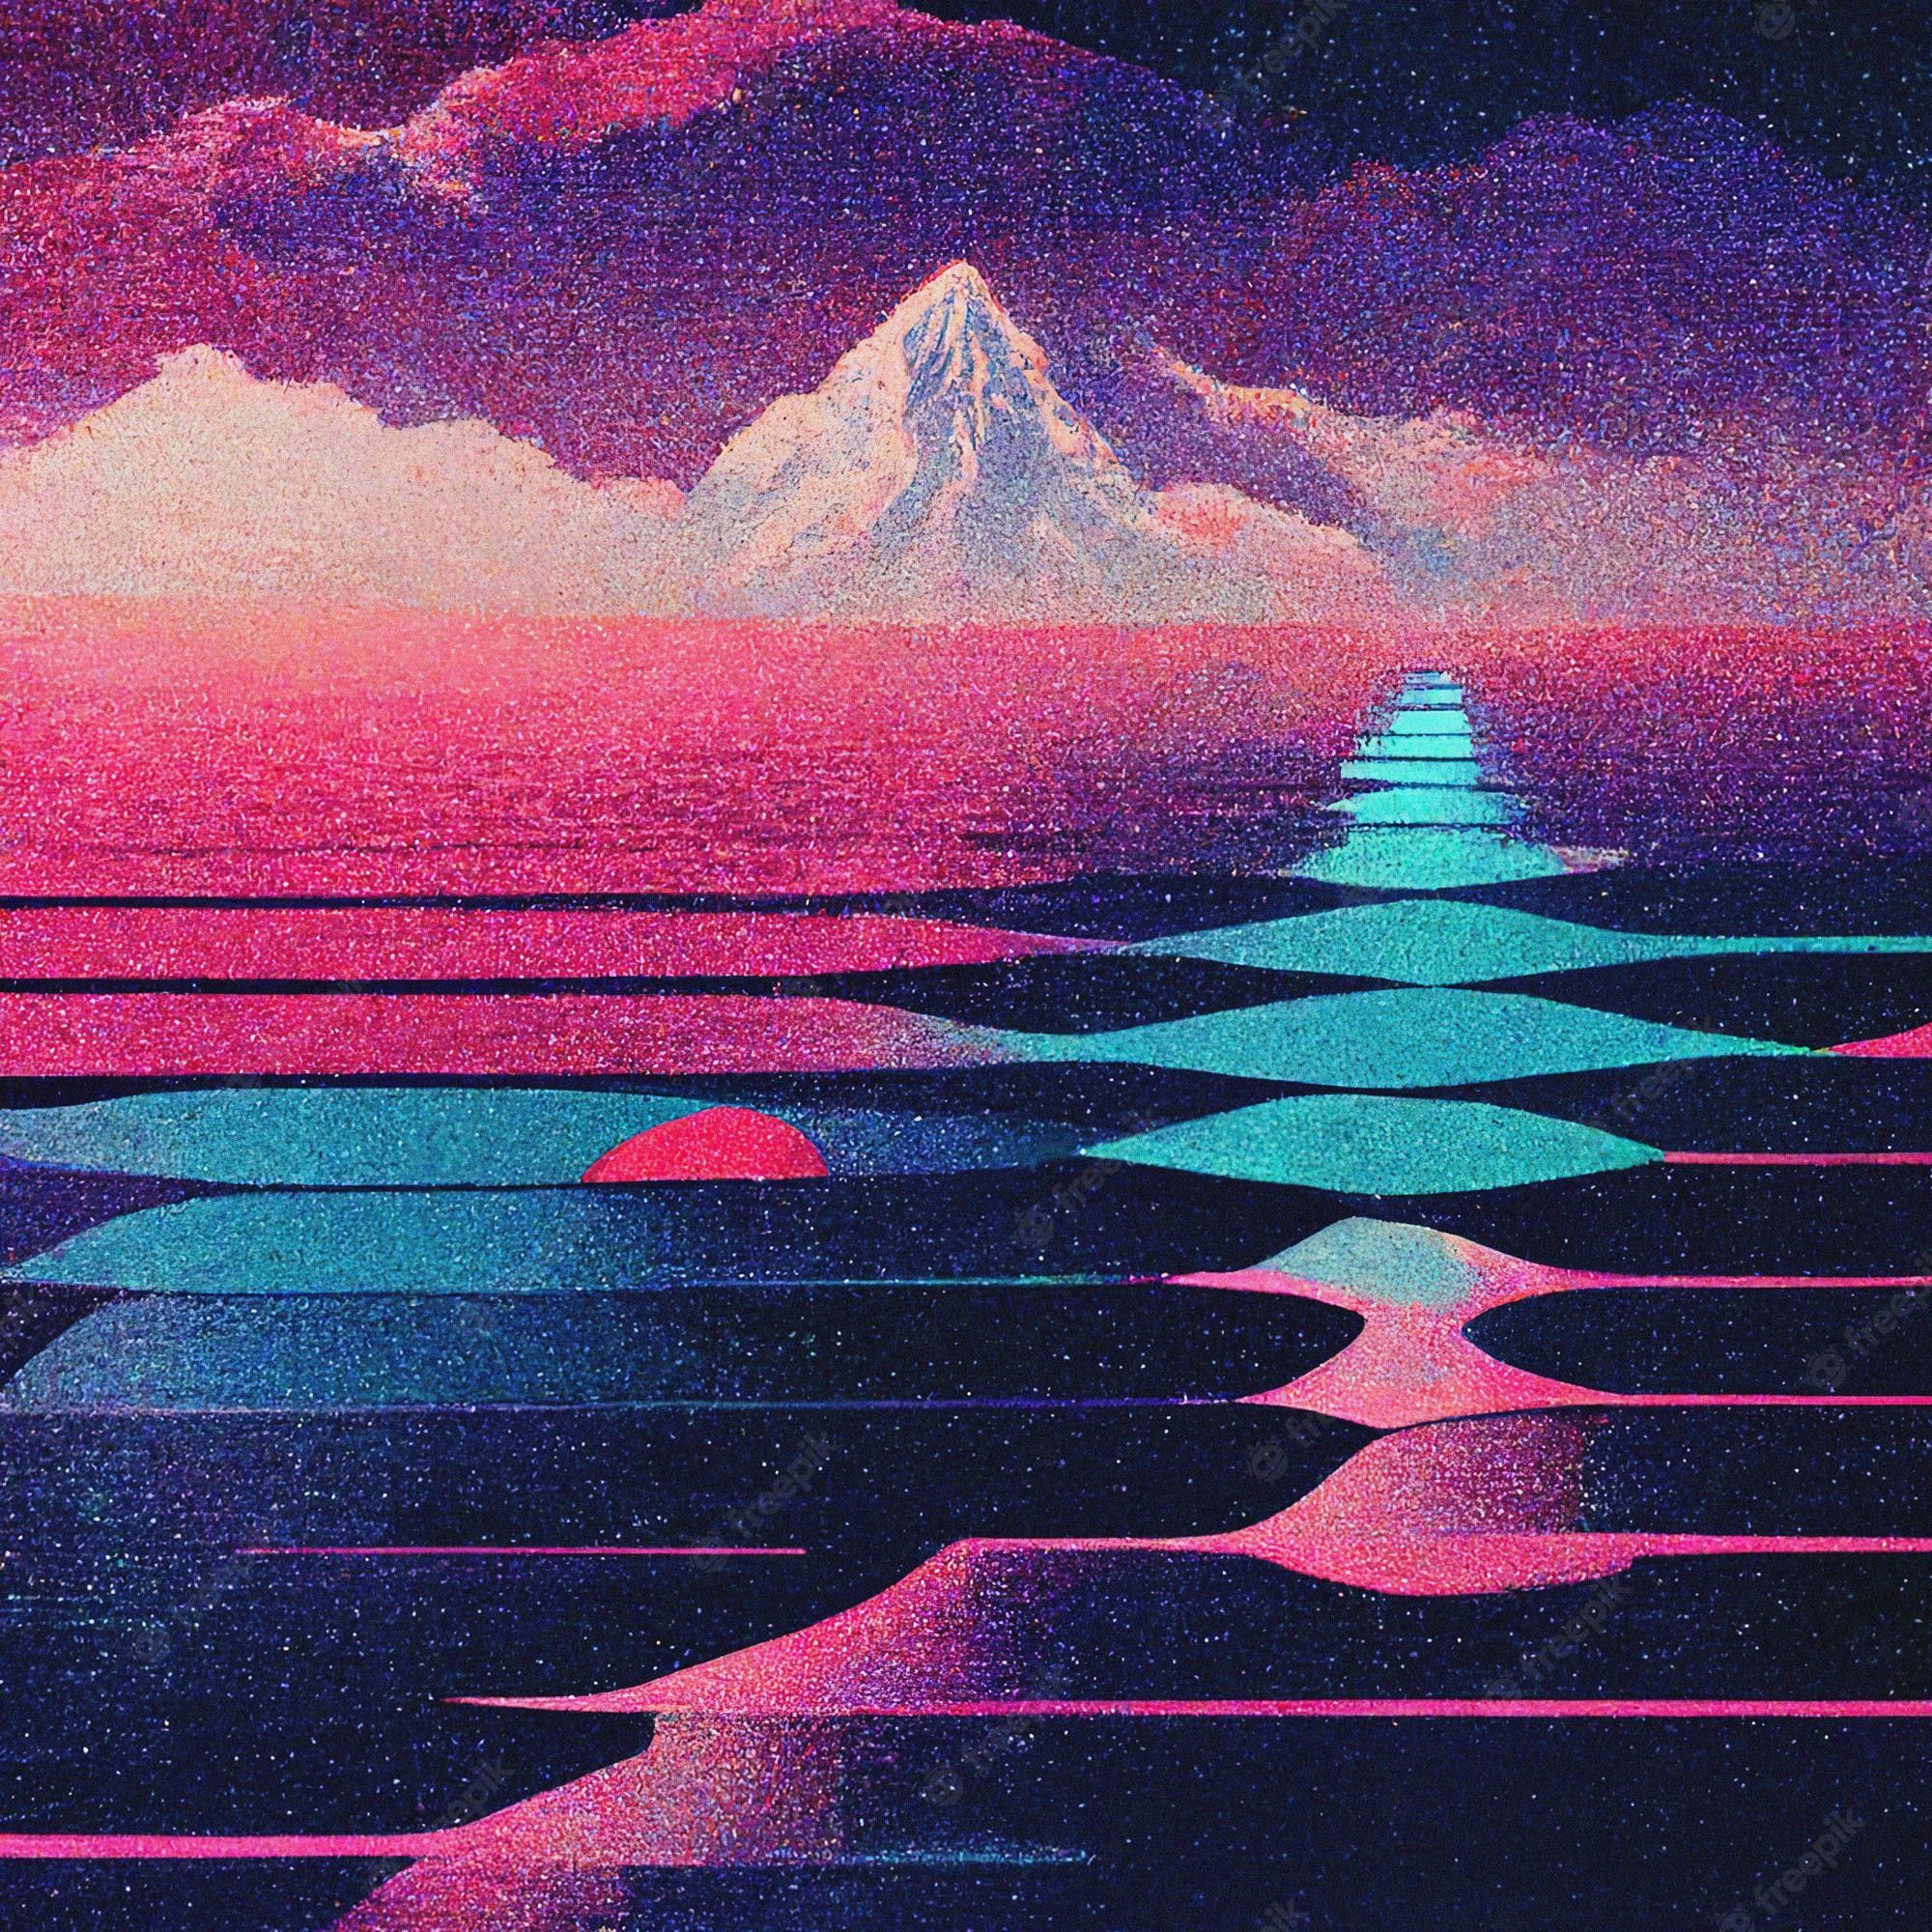 A painting of the ocean with mountains in it - 80s